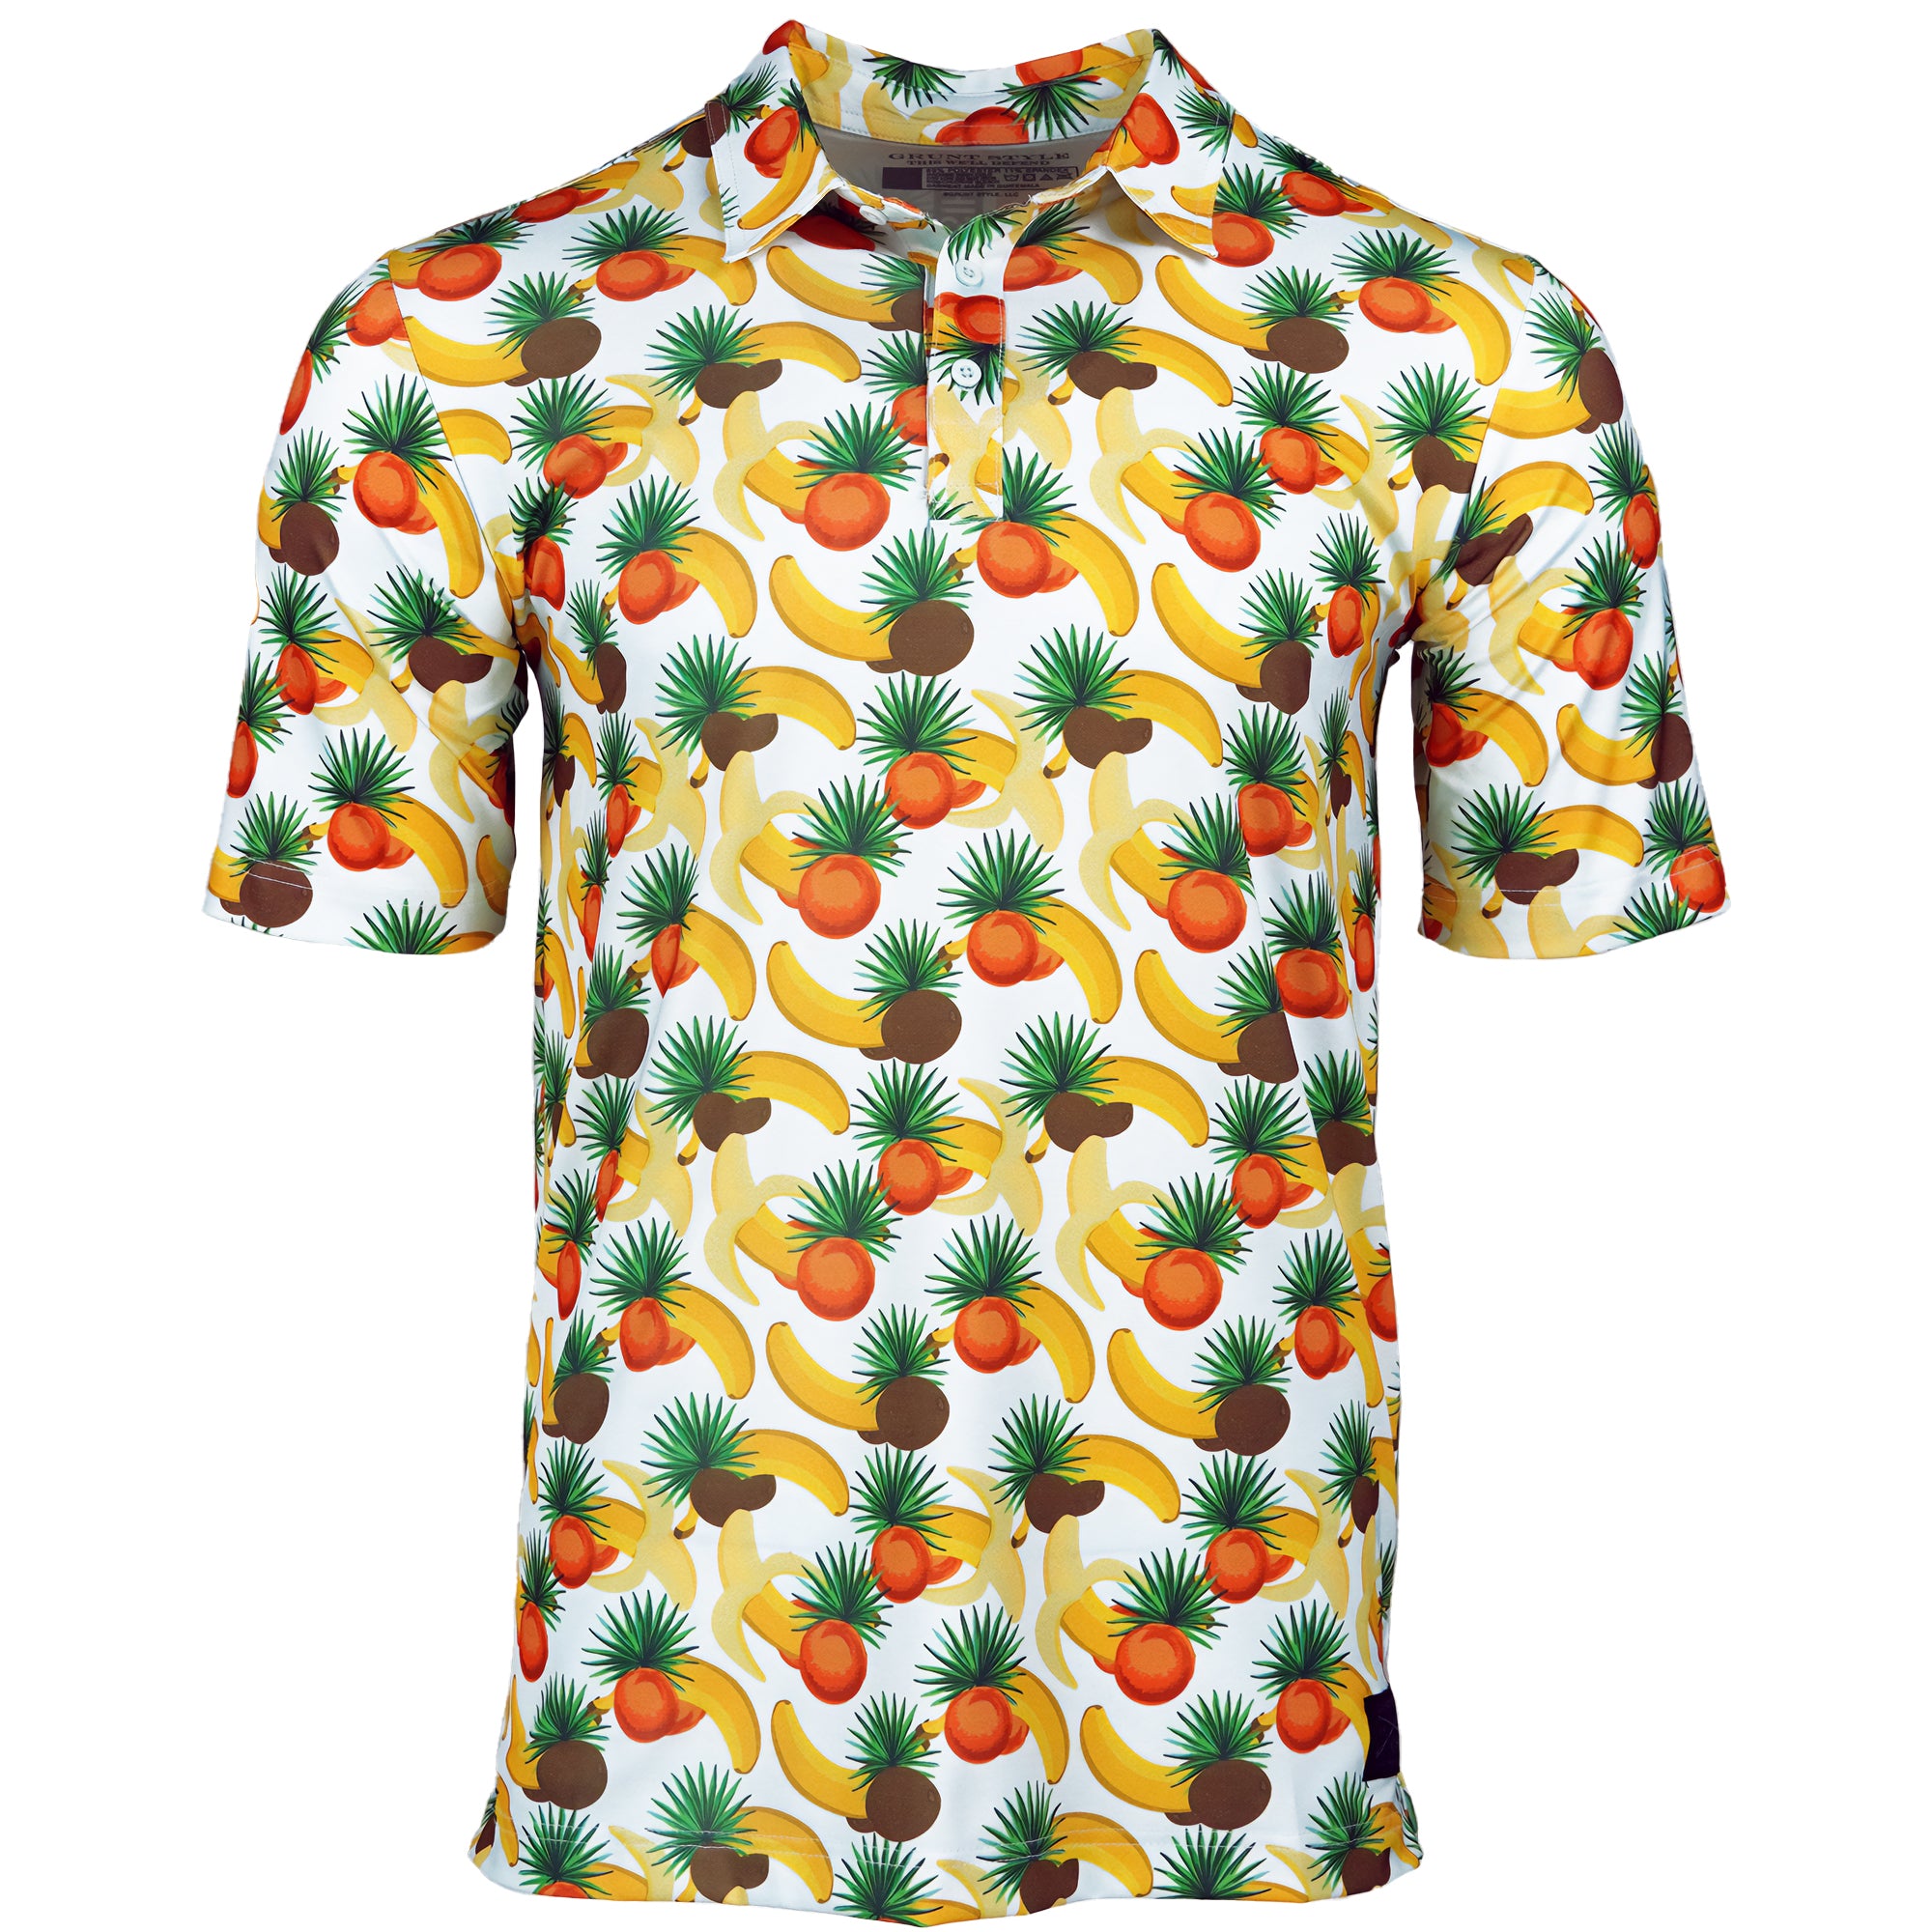 Grunt Style Button Down Polo Shirt Grunt Style